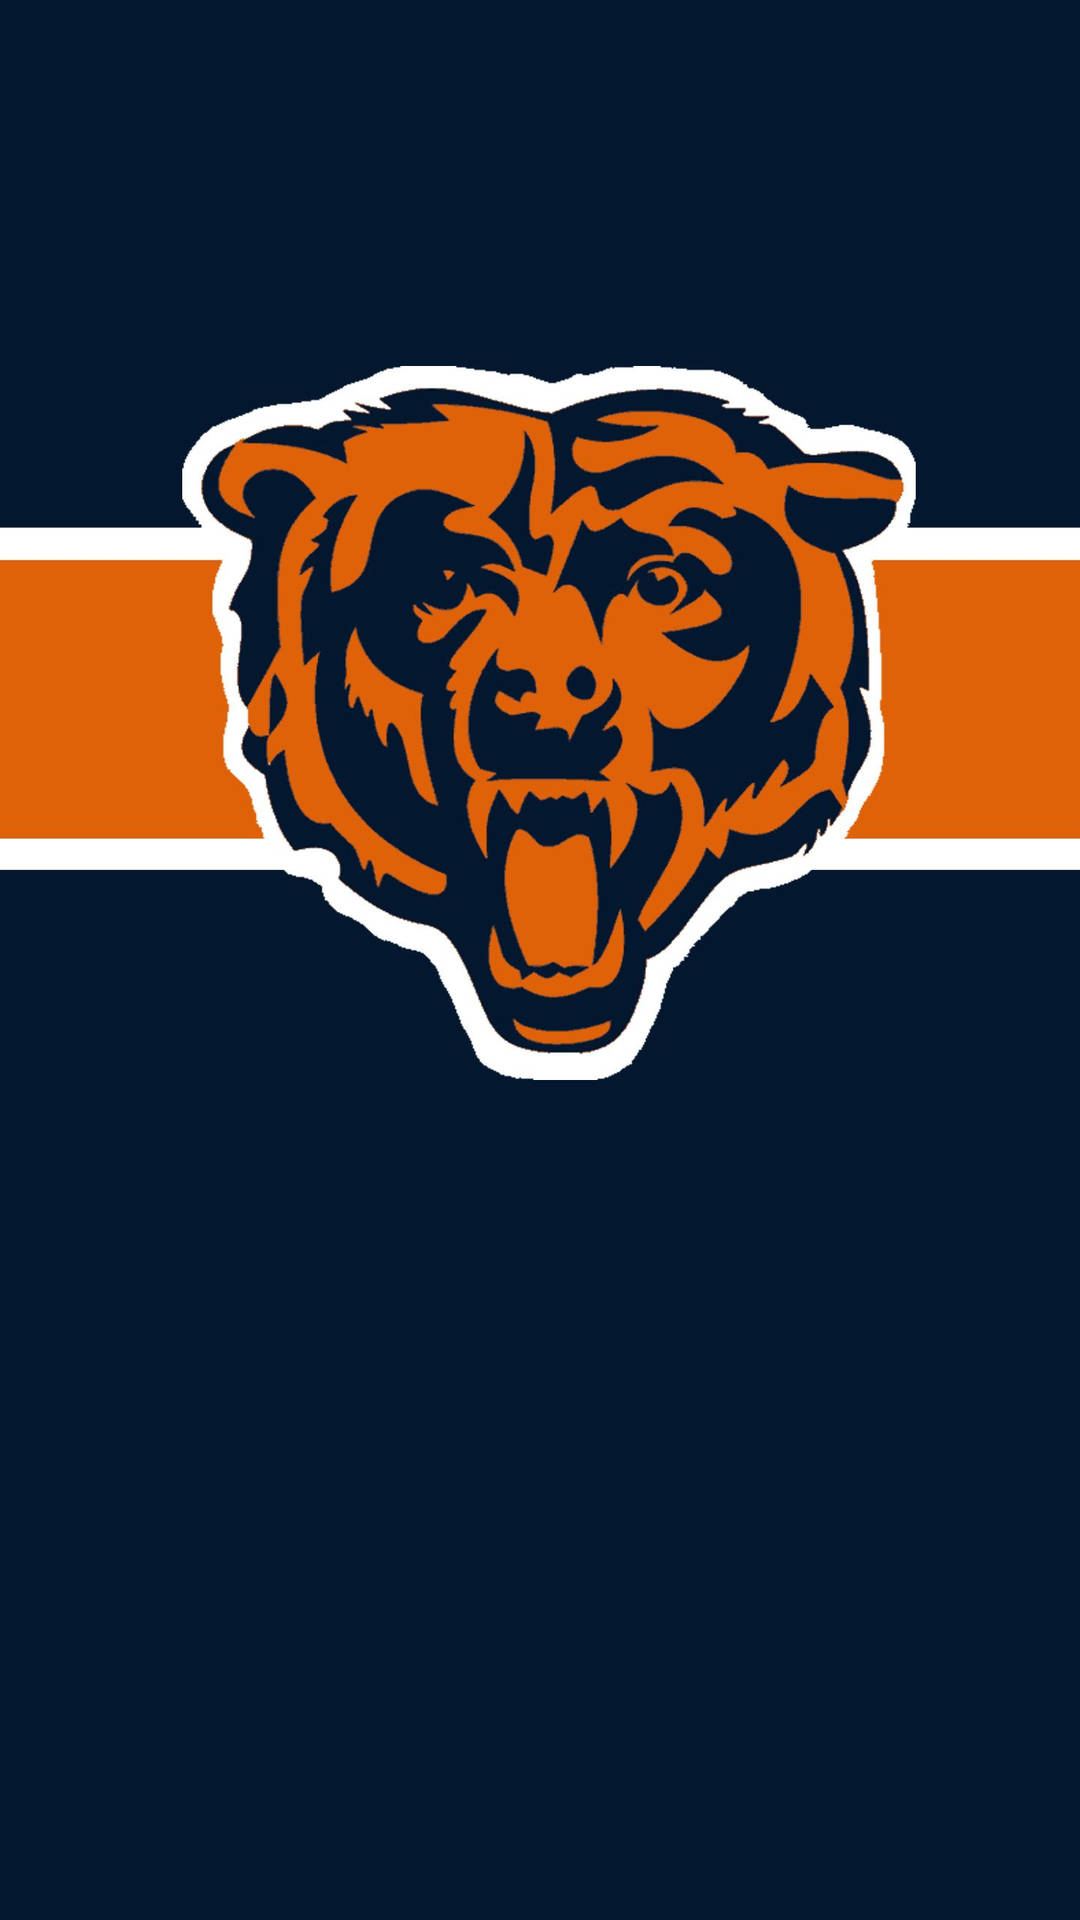 The Chicago Bears Clinch the Victory! Wallpaper